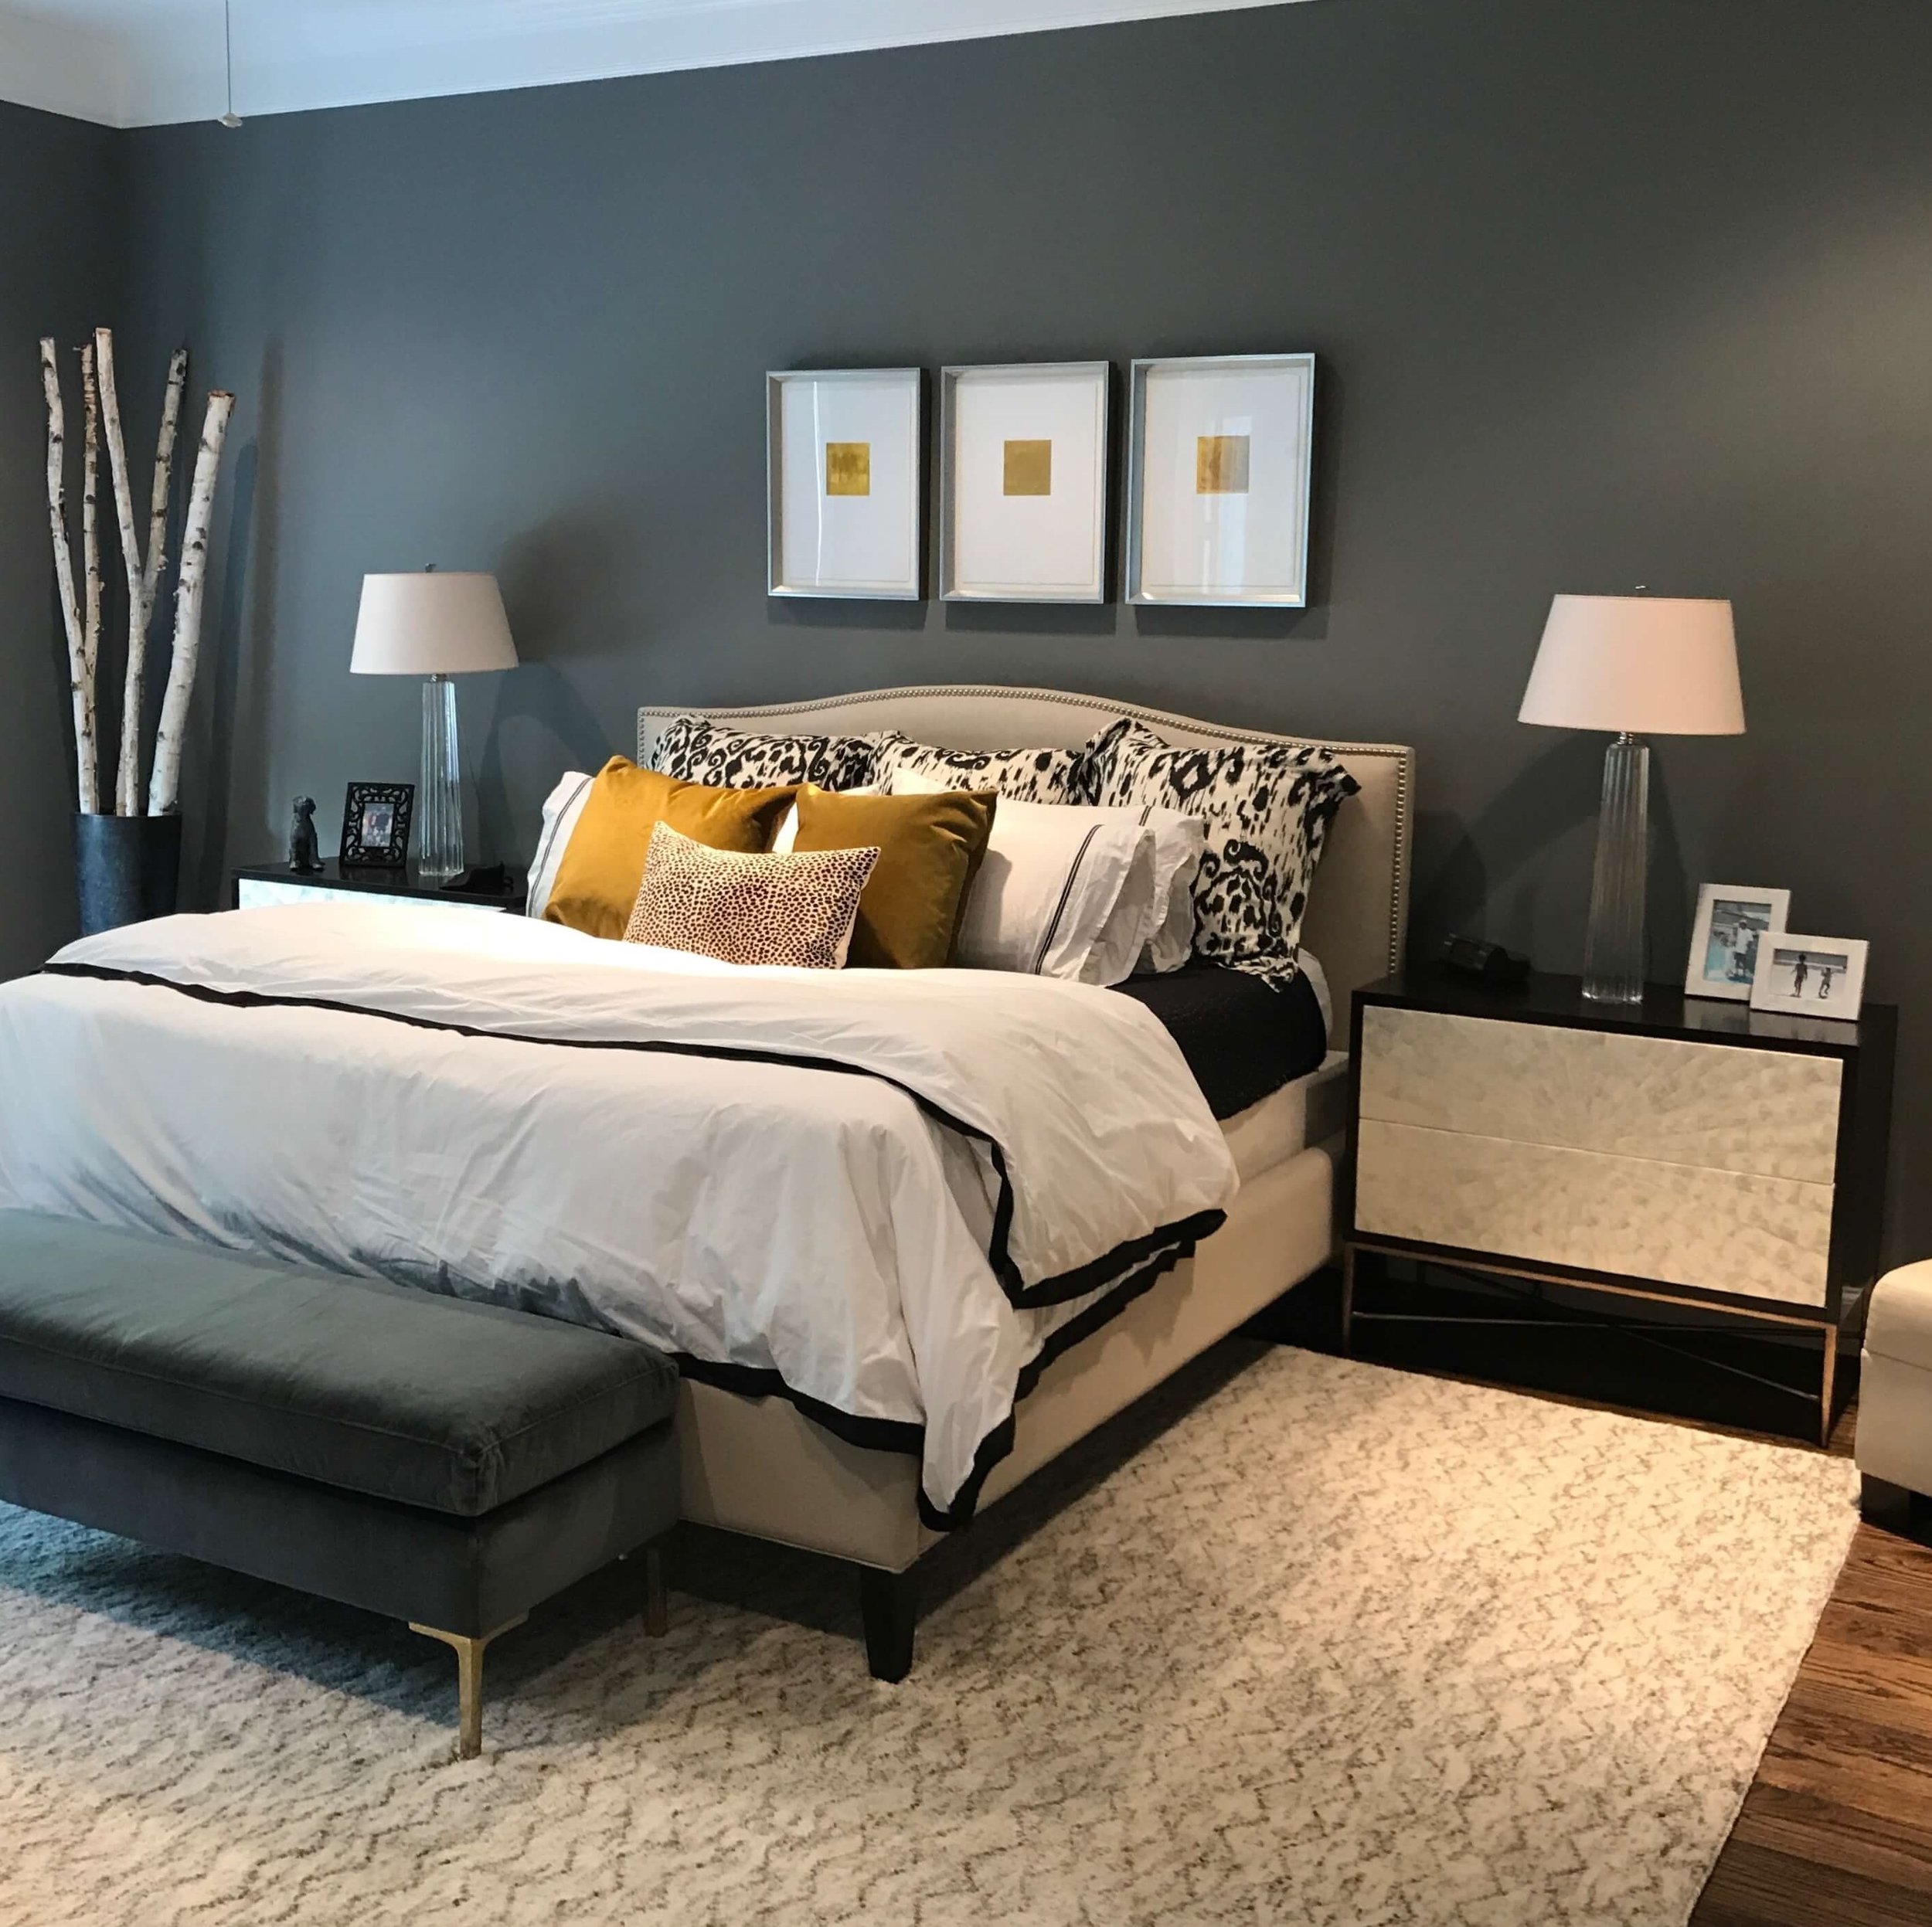 What Gray Paint Color Is Best? Here are my favorites ...